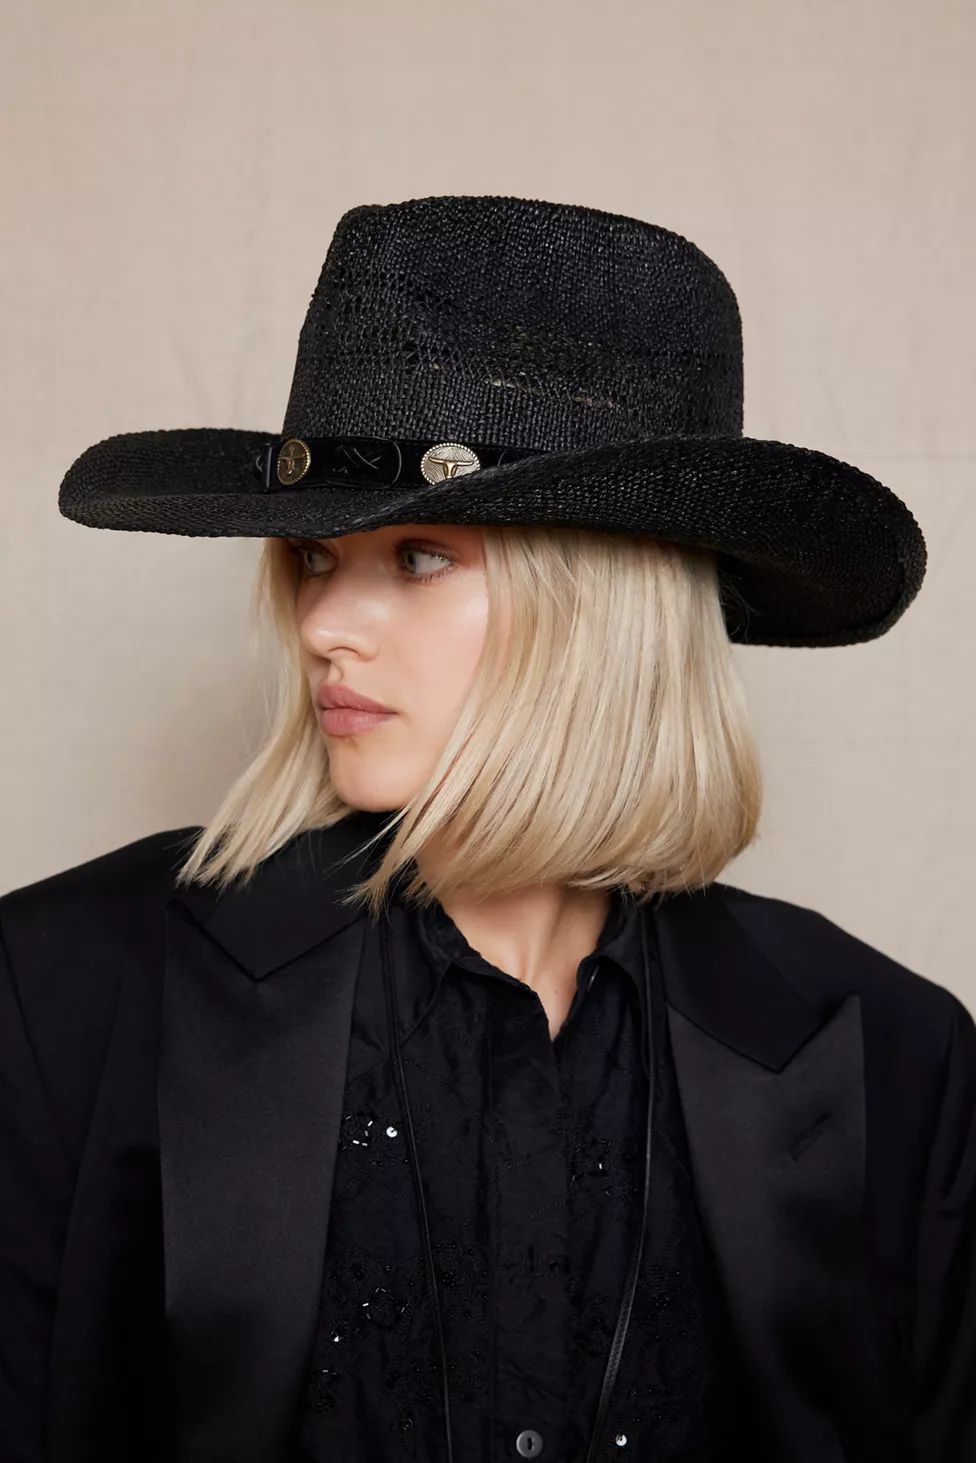 Ryder Straw Cowboy Hat | Urban Outfitters (US and RoW)